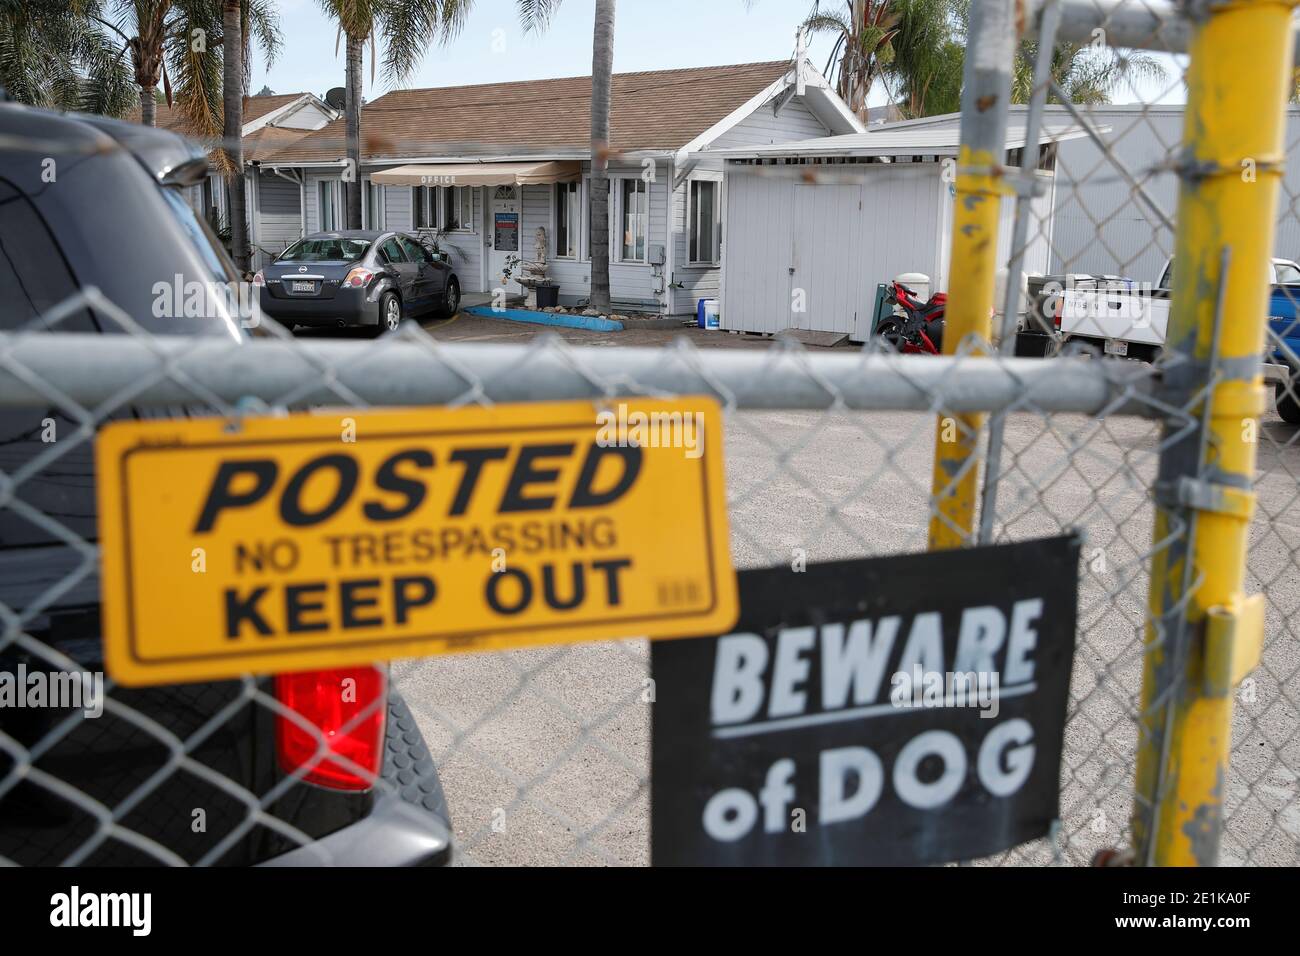 The co-owned pool cleaning business of Ashli Babbitt, the woman fatally shot by police during Wednesday's siege of the U.S. Capitol, and her husband, is shown in Spring Valley, California, U.S., January 7, 2021.  REUTERS/Mike Blake Stock Photo